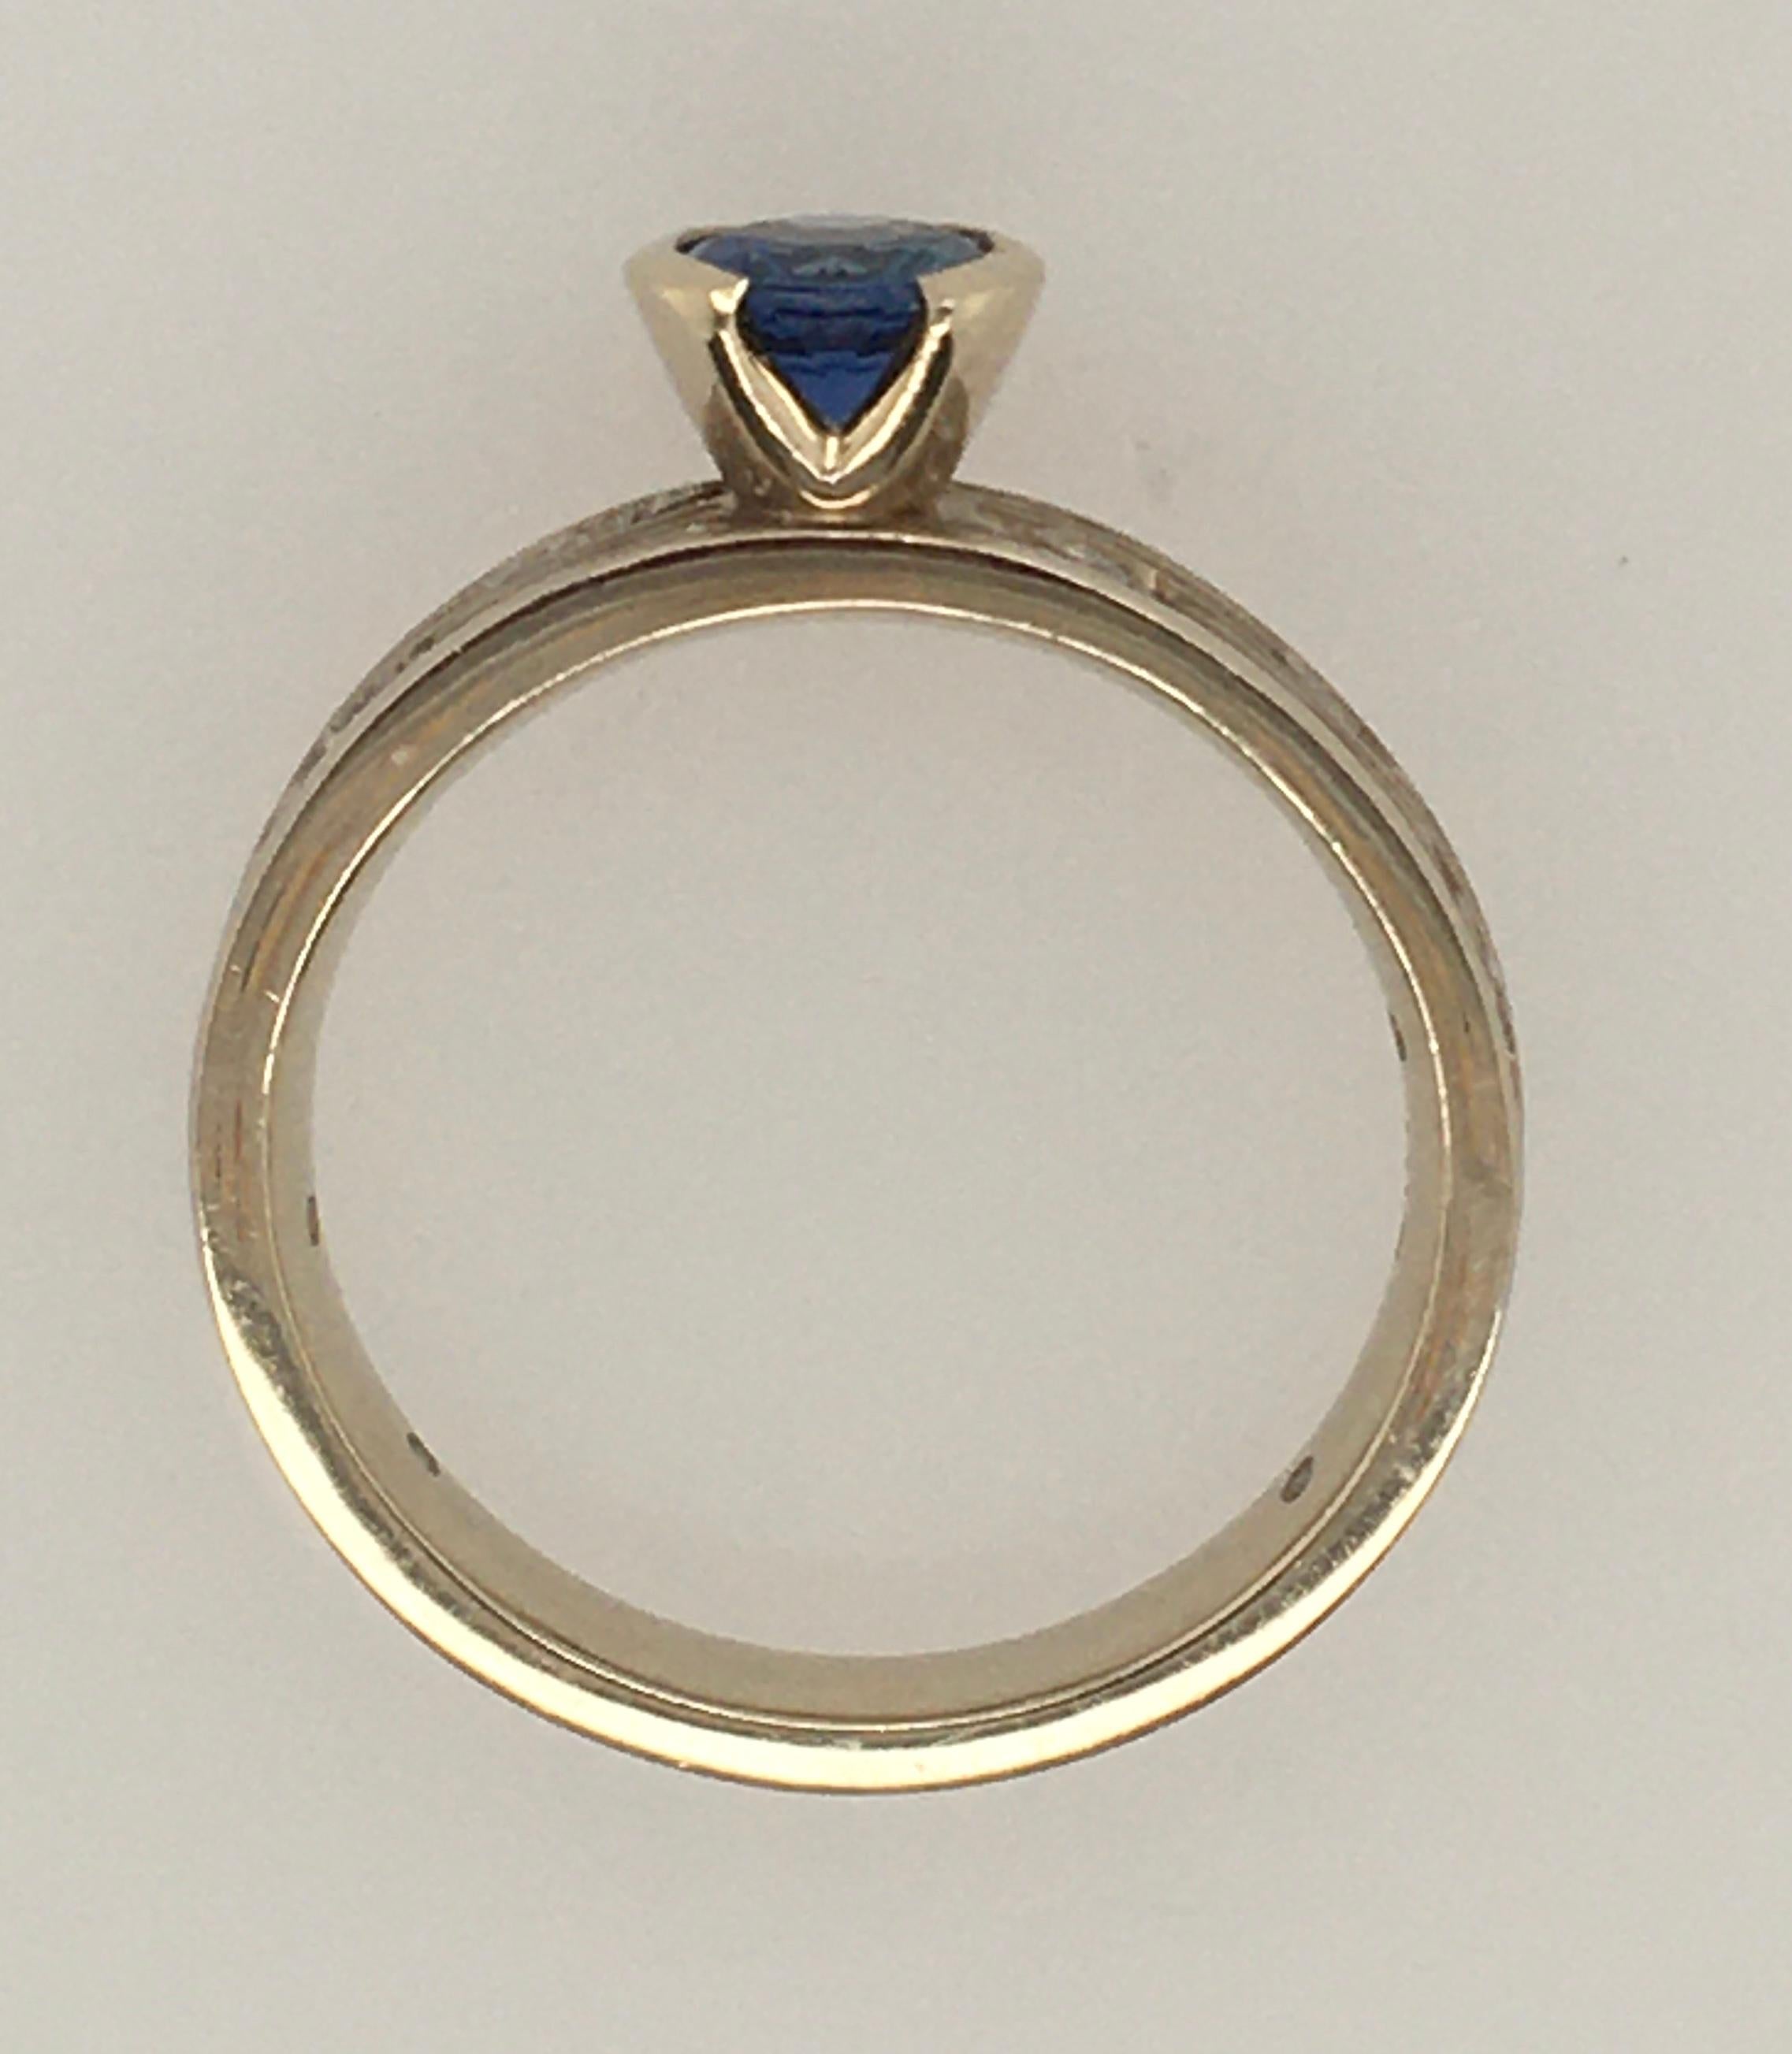 STUDIO 311 Narrow Starry Night .48 CT Blue Sapphire & Diamonds White Gold Ring  In Excellent Condition For Sale In Kennebunkport, ME